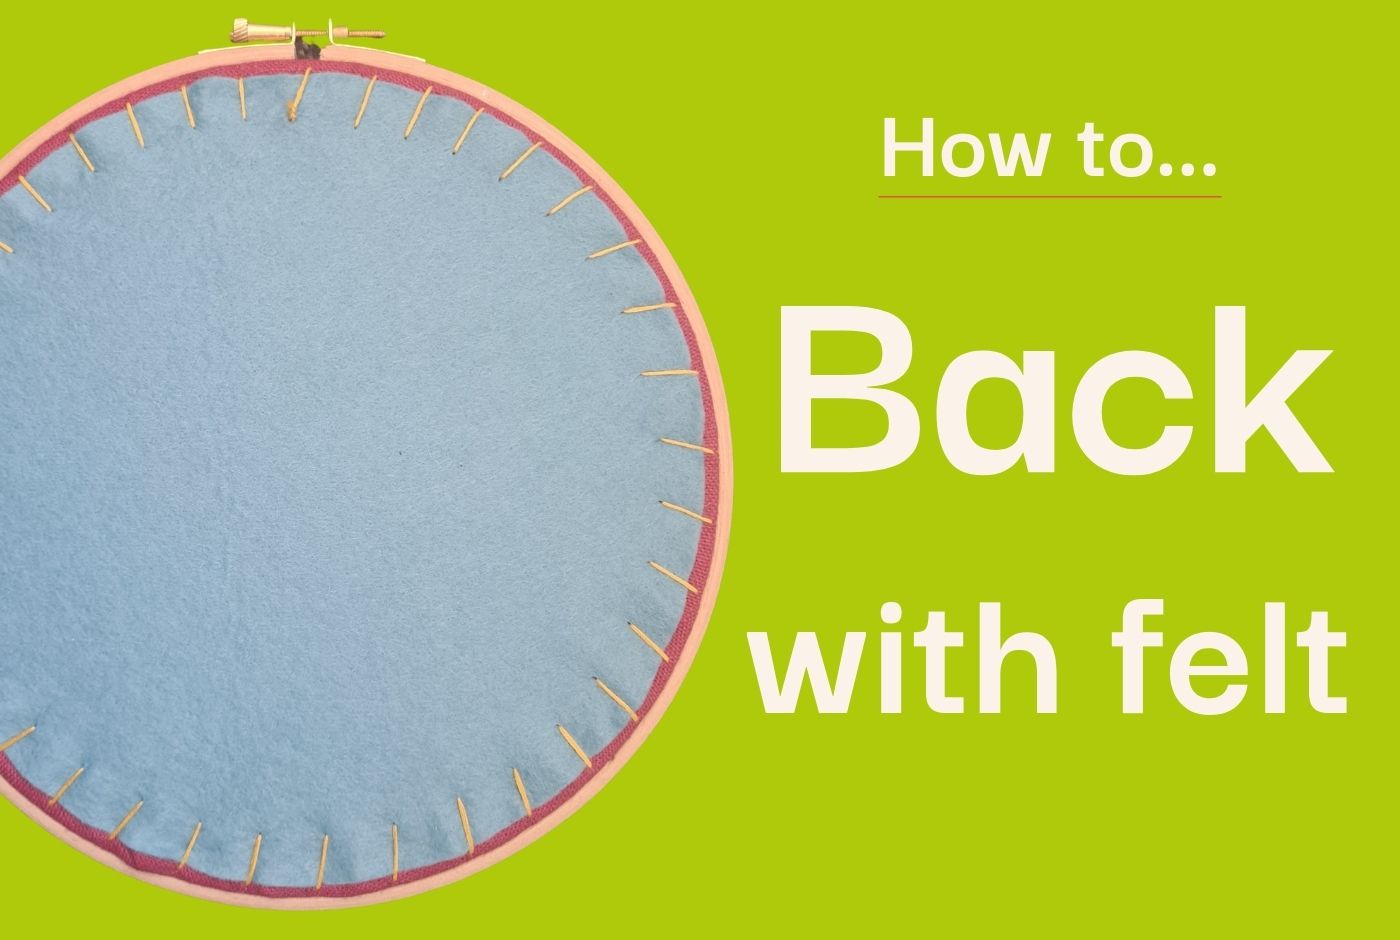 Photo of the back of an embroidery hoop, alongside text saying 'how to back with felt'